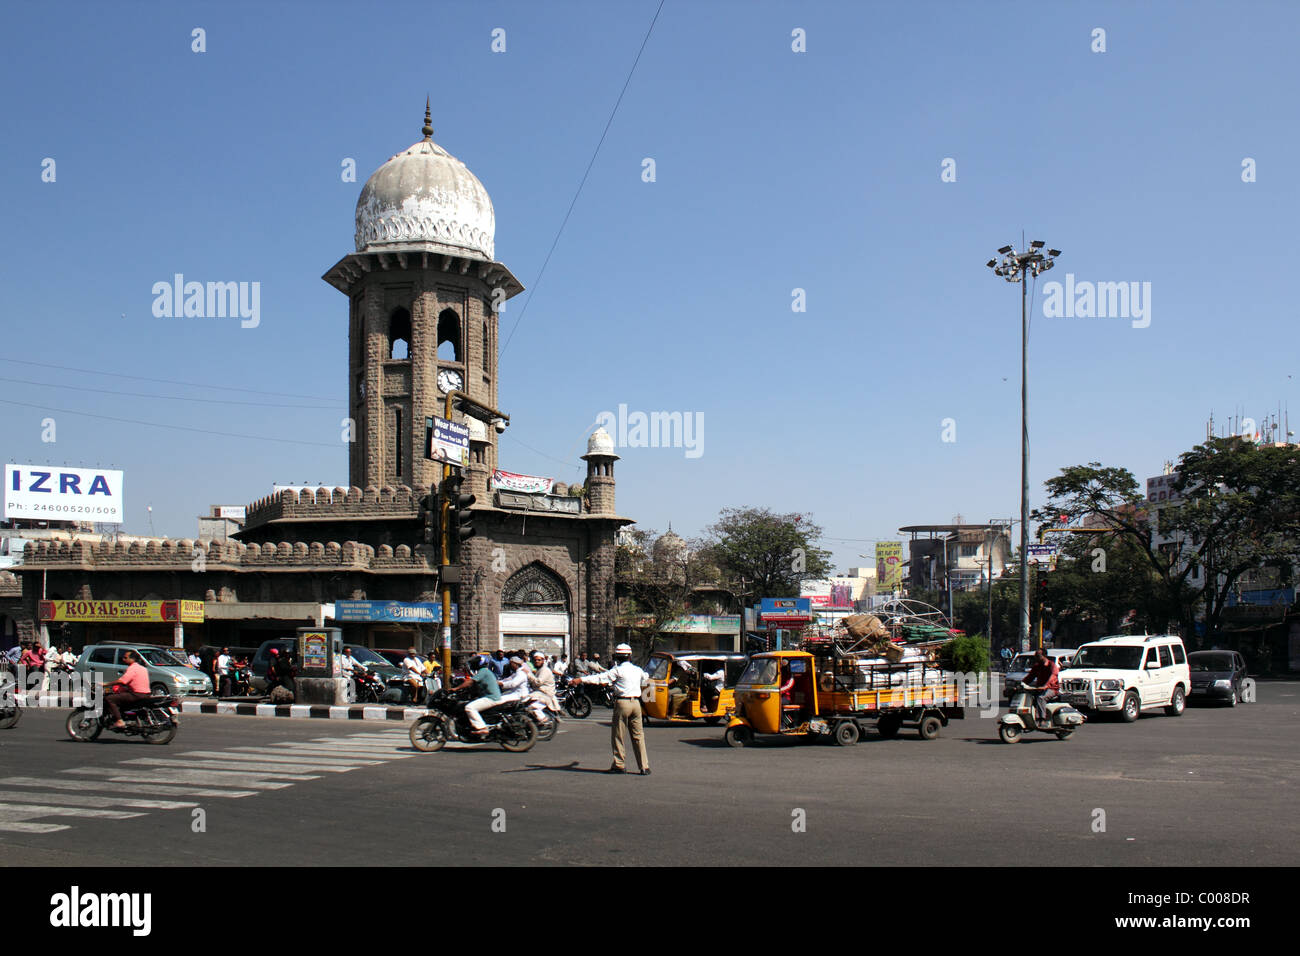 Landscape view of  policeman directing traffic in front of Mozamjahi Market, Hyderabad India Stock Photo